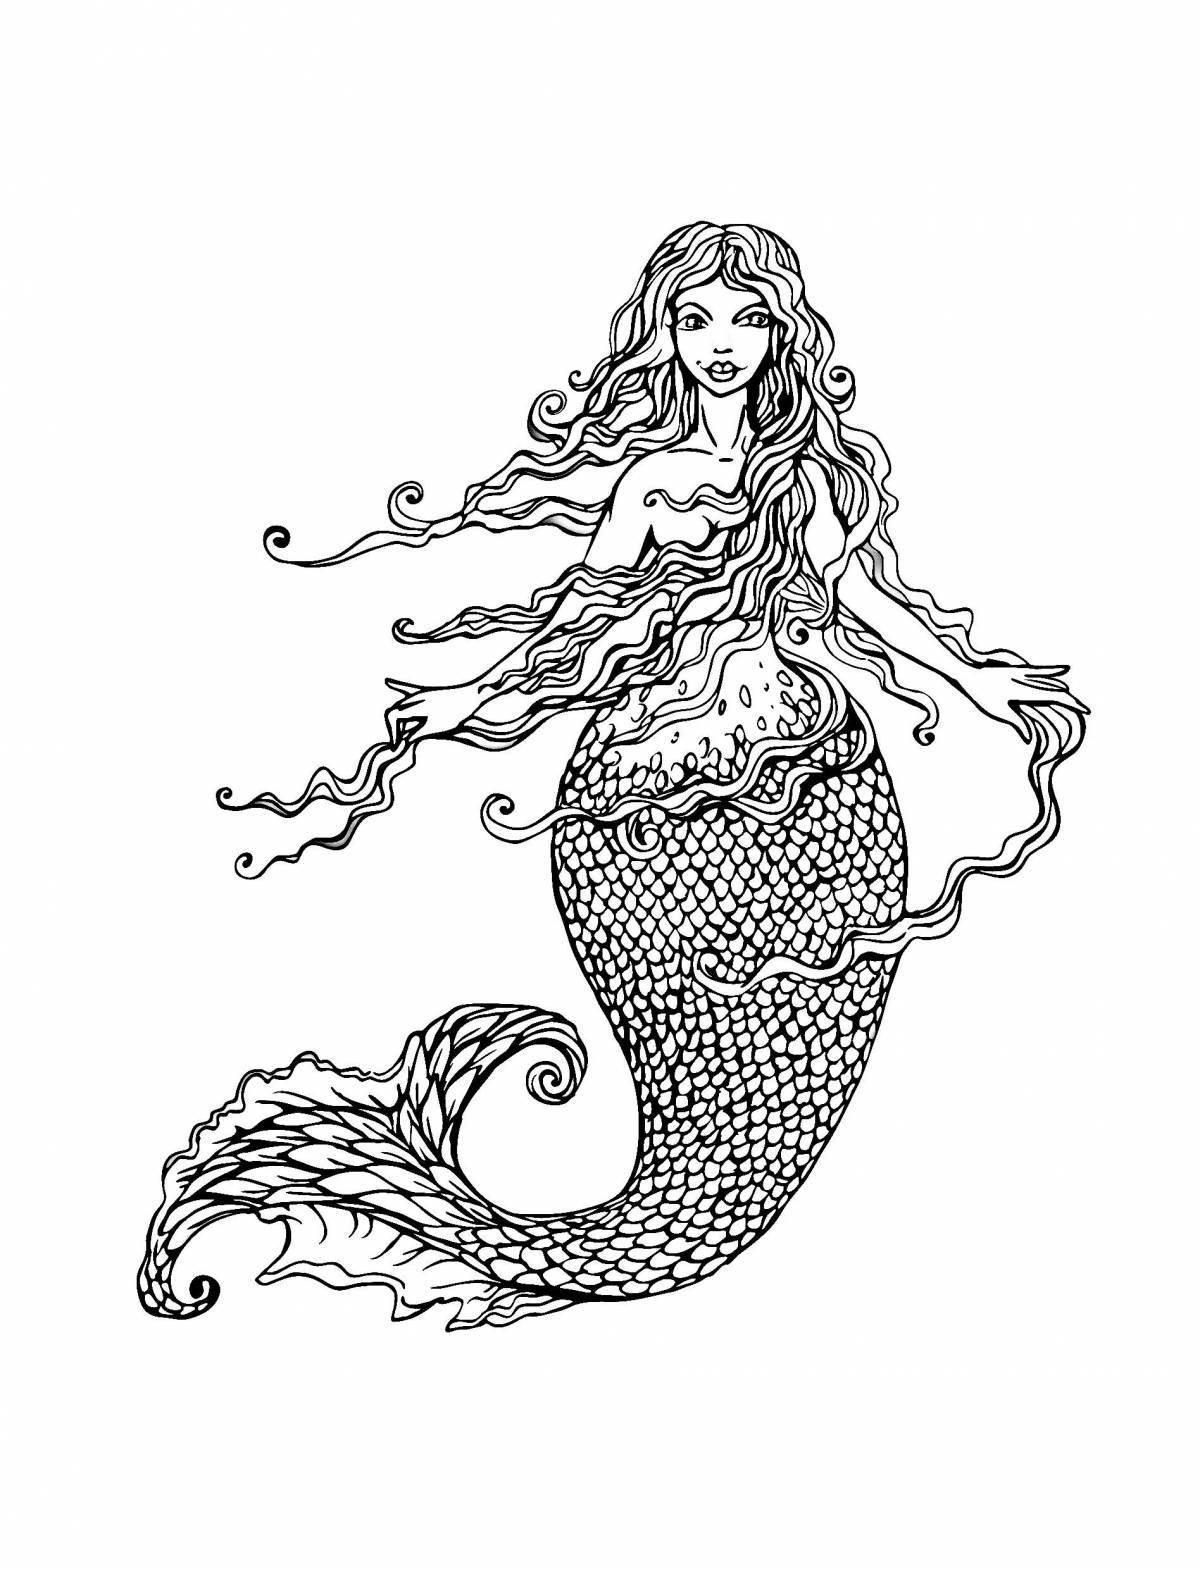 Exquisite coloring drawing of a mermaid